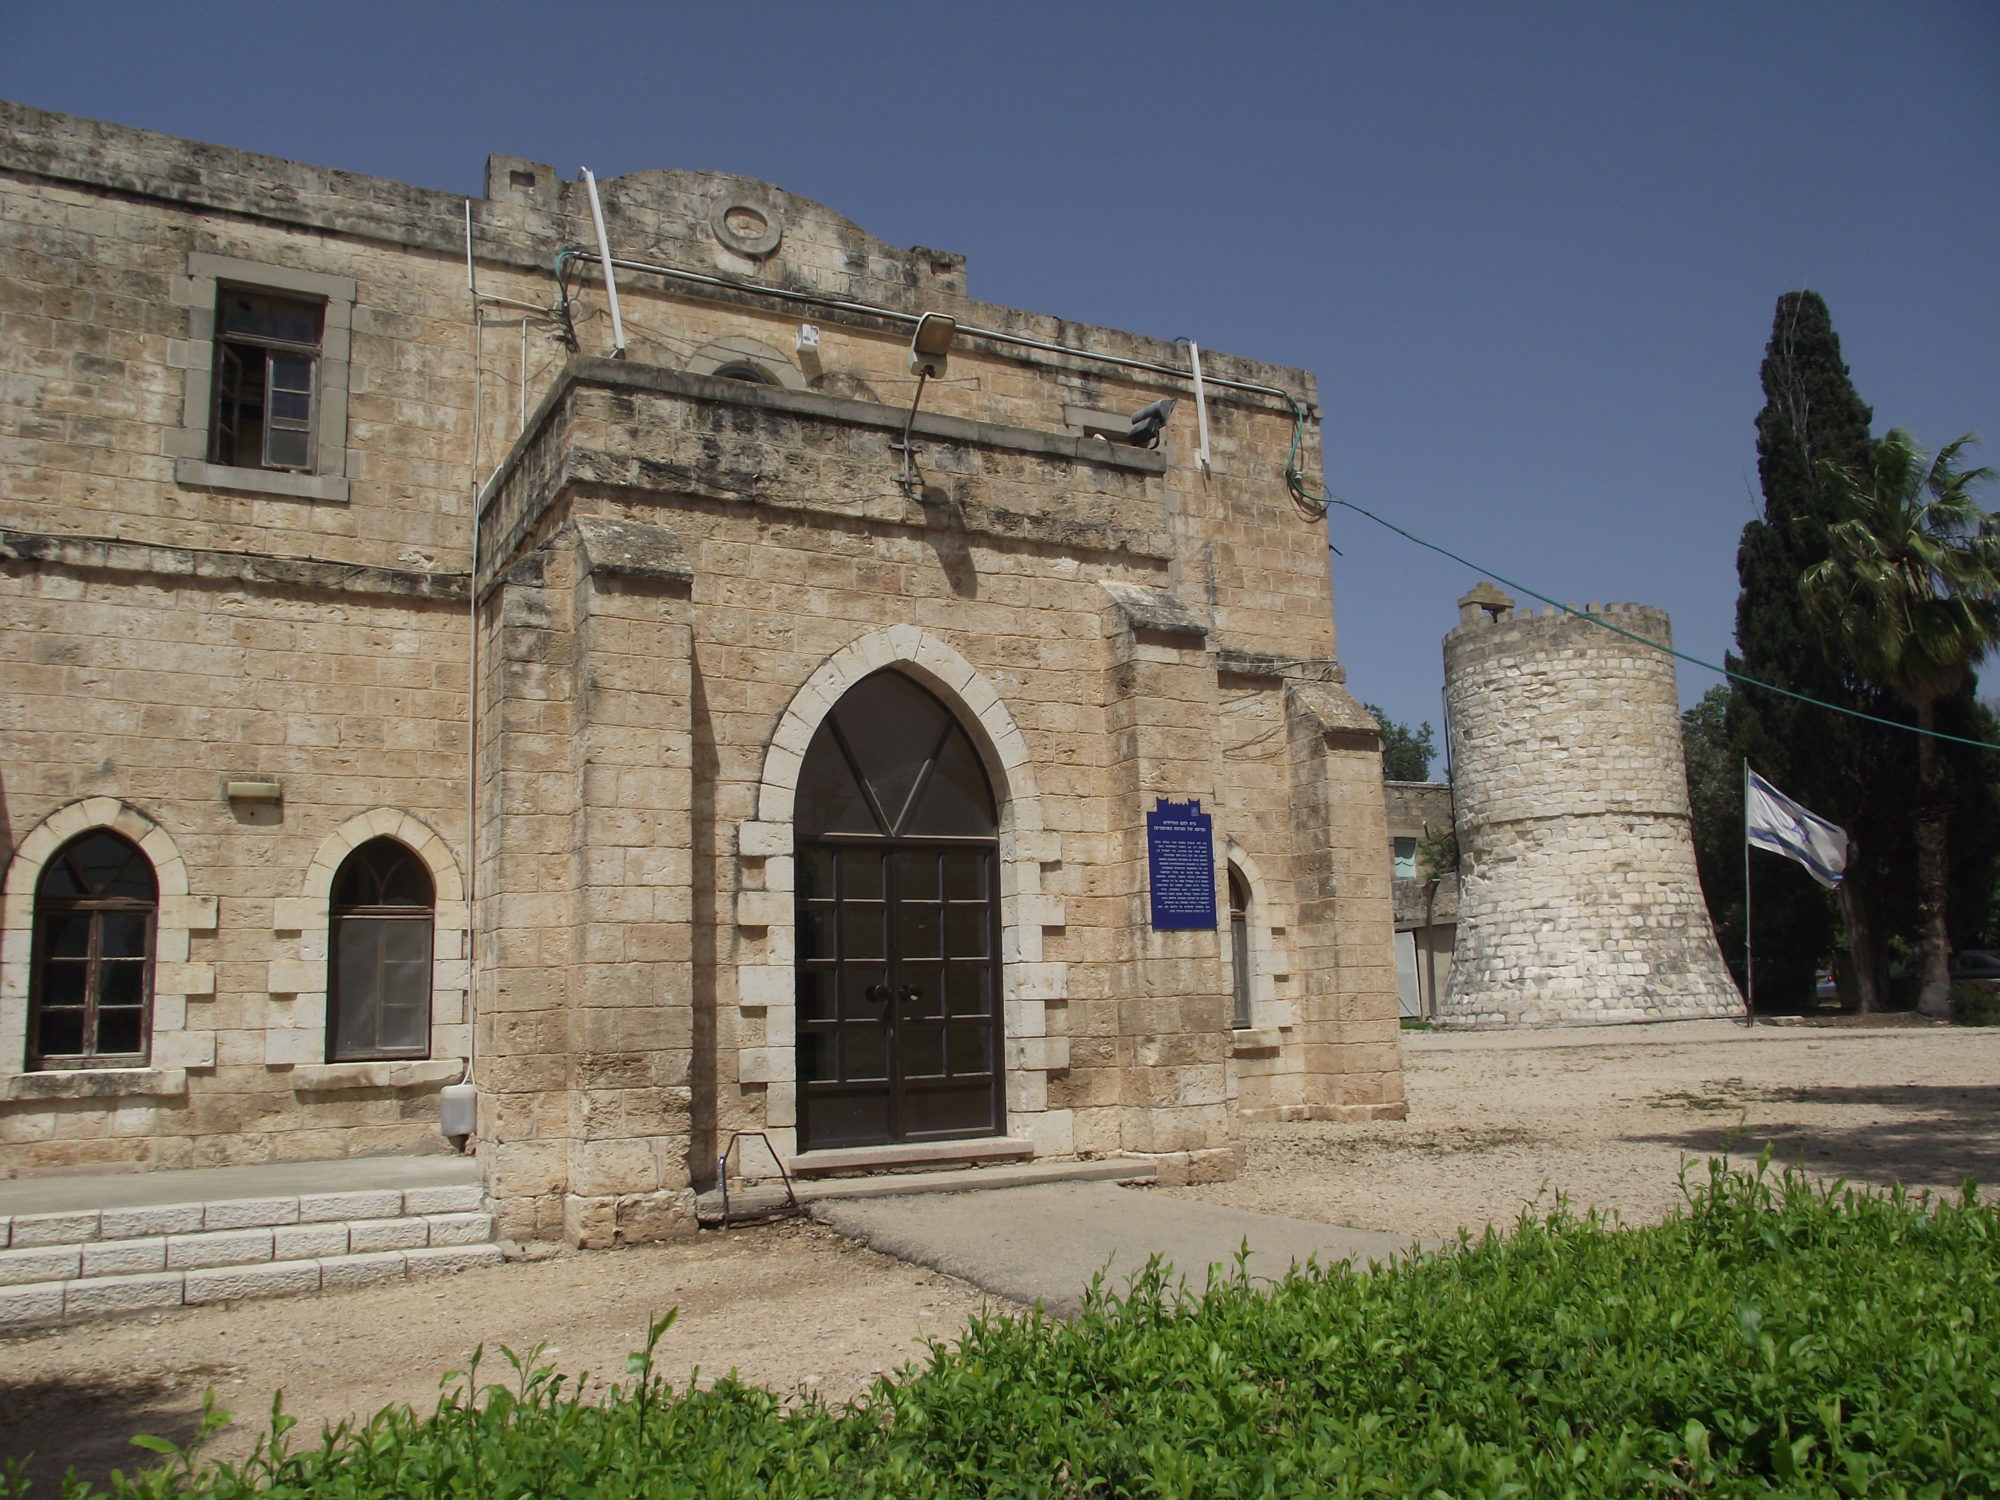 The Templers structures at Bethlehem of the Galilee